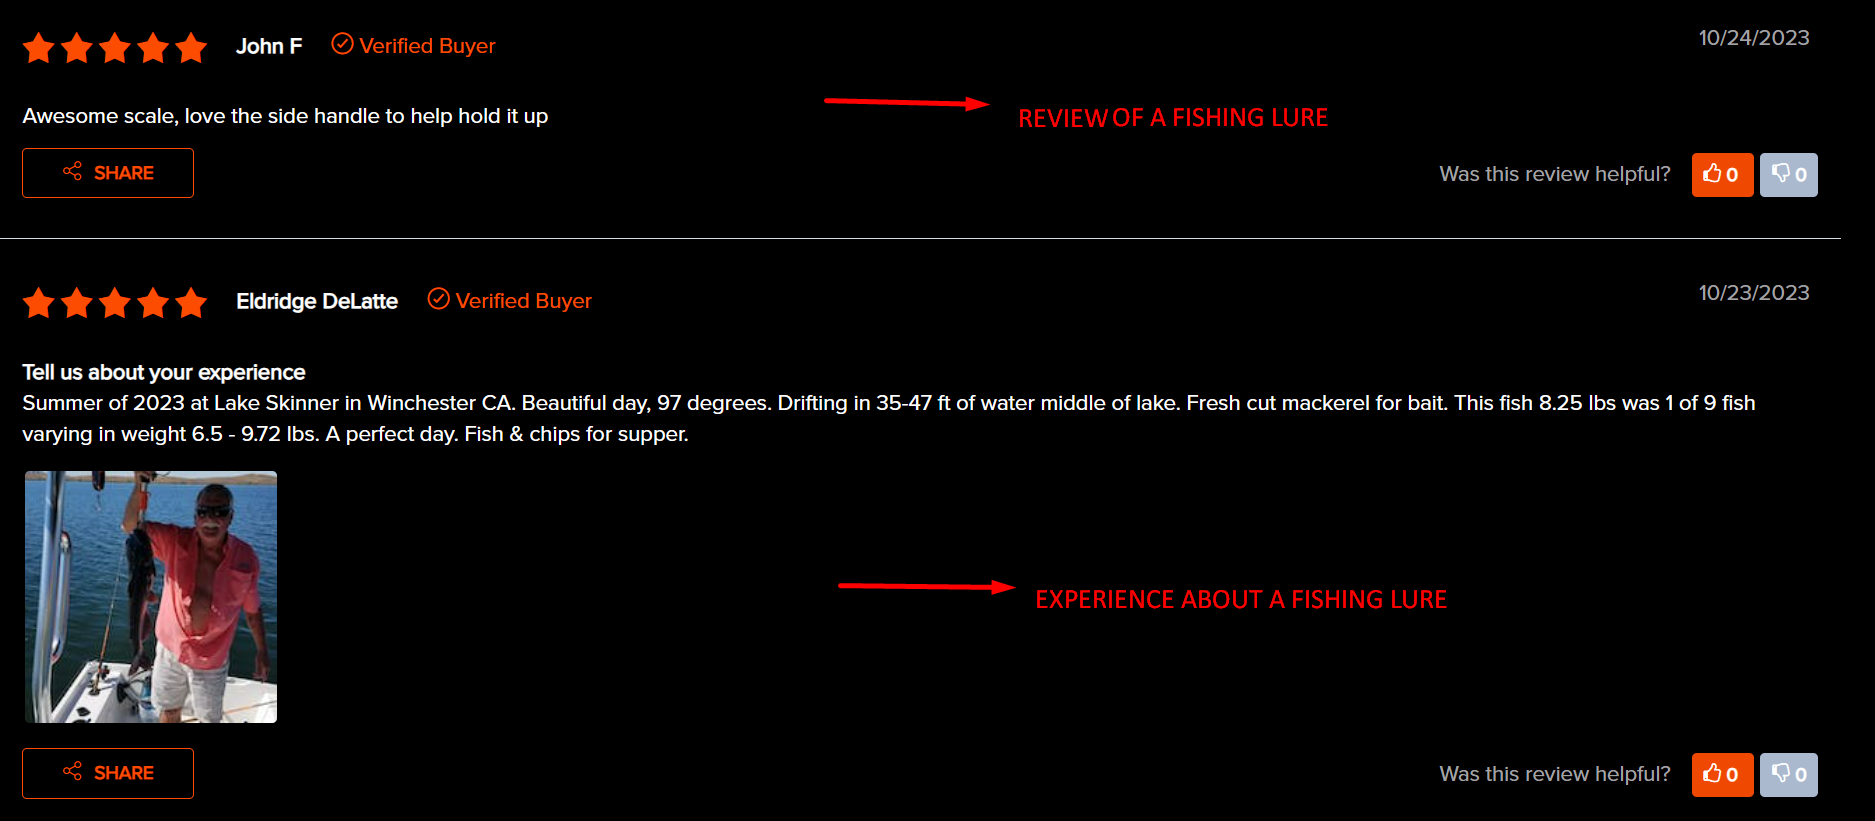 Difference between a review and an experience